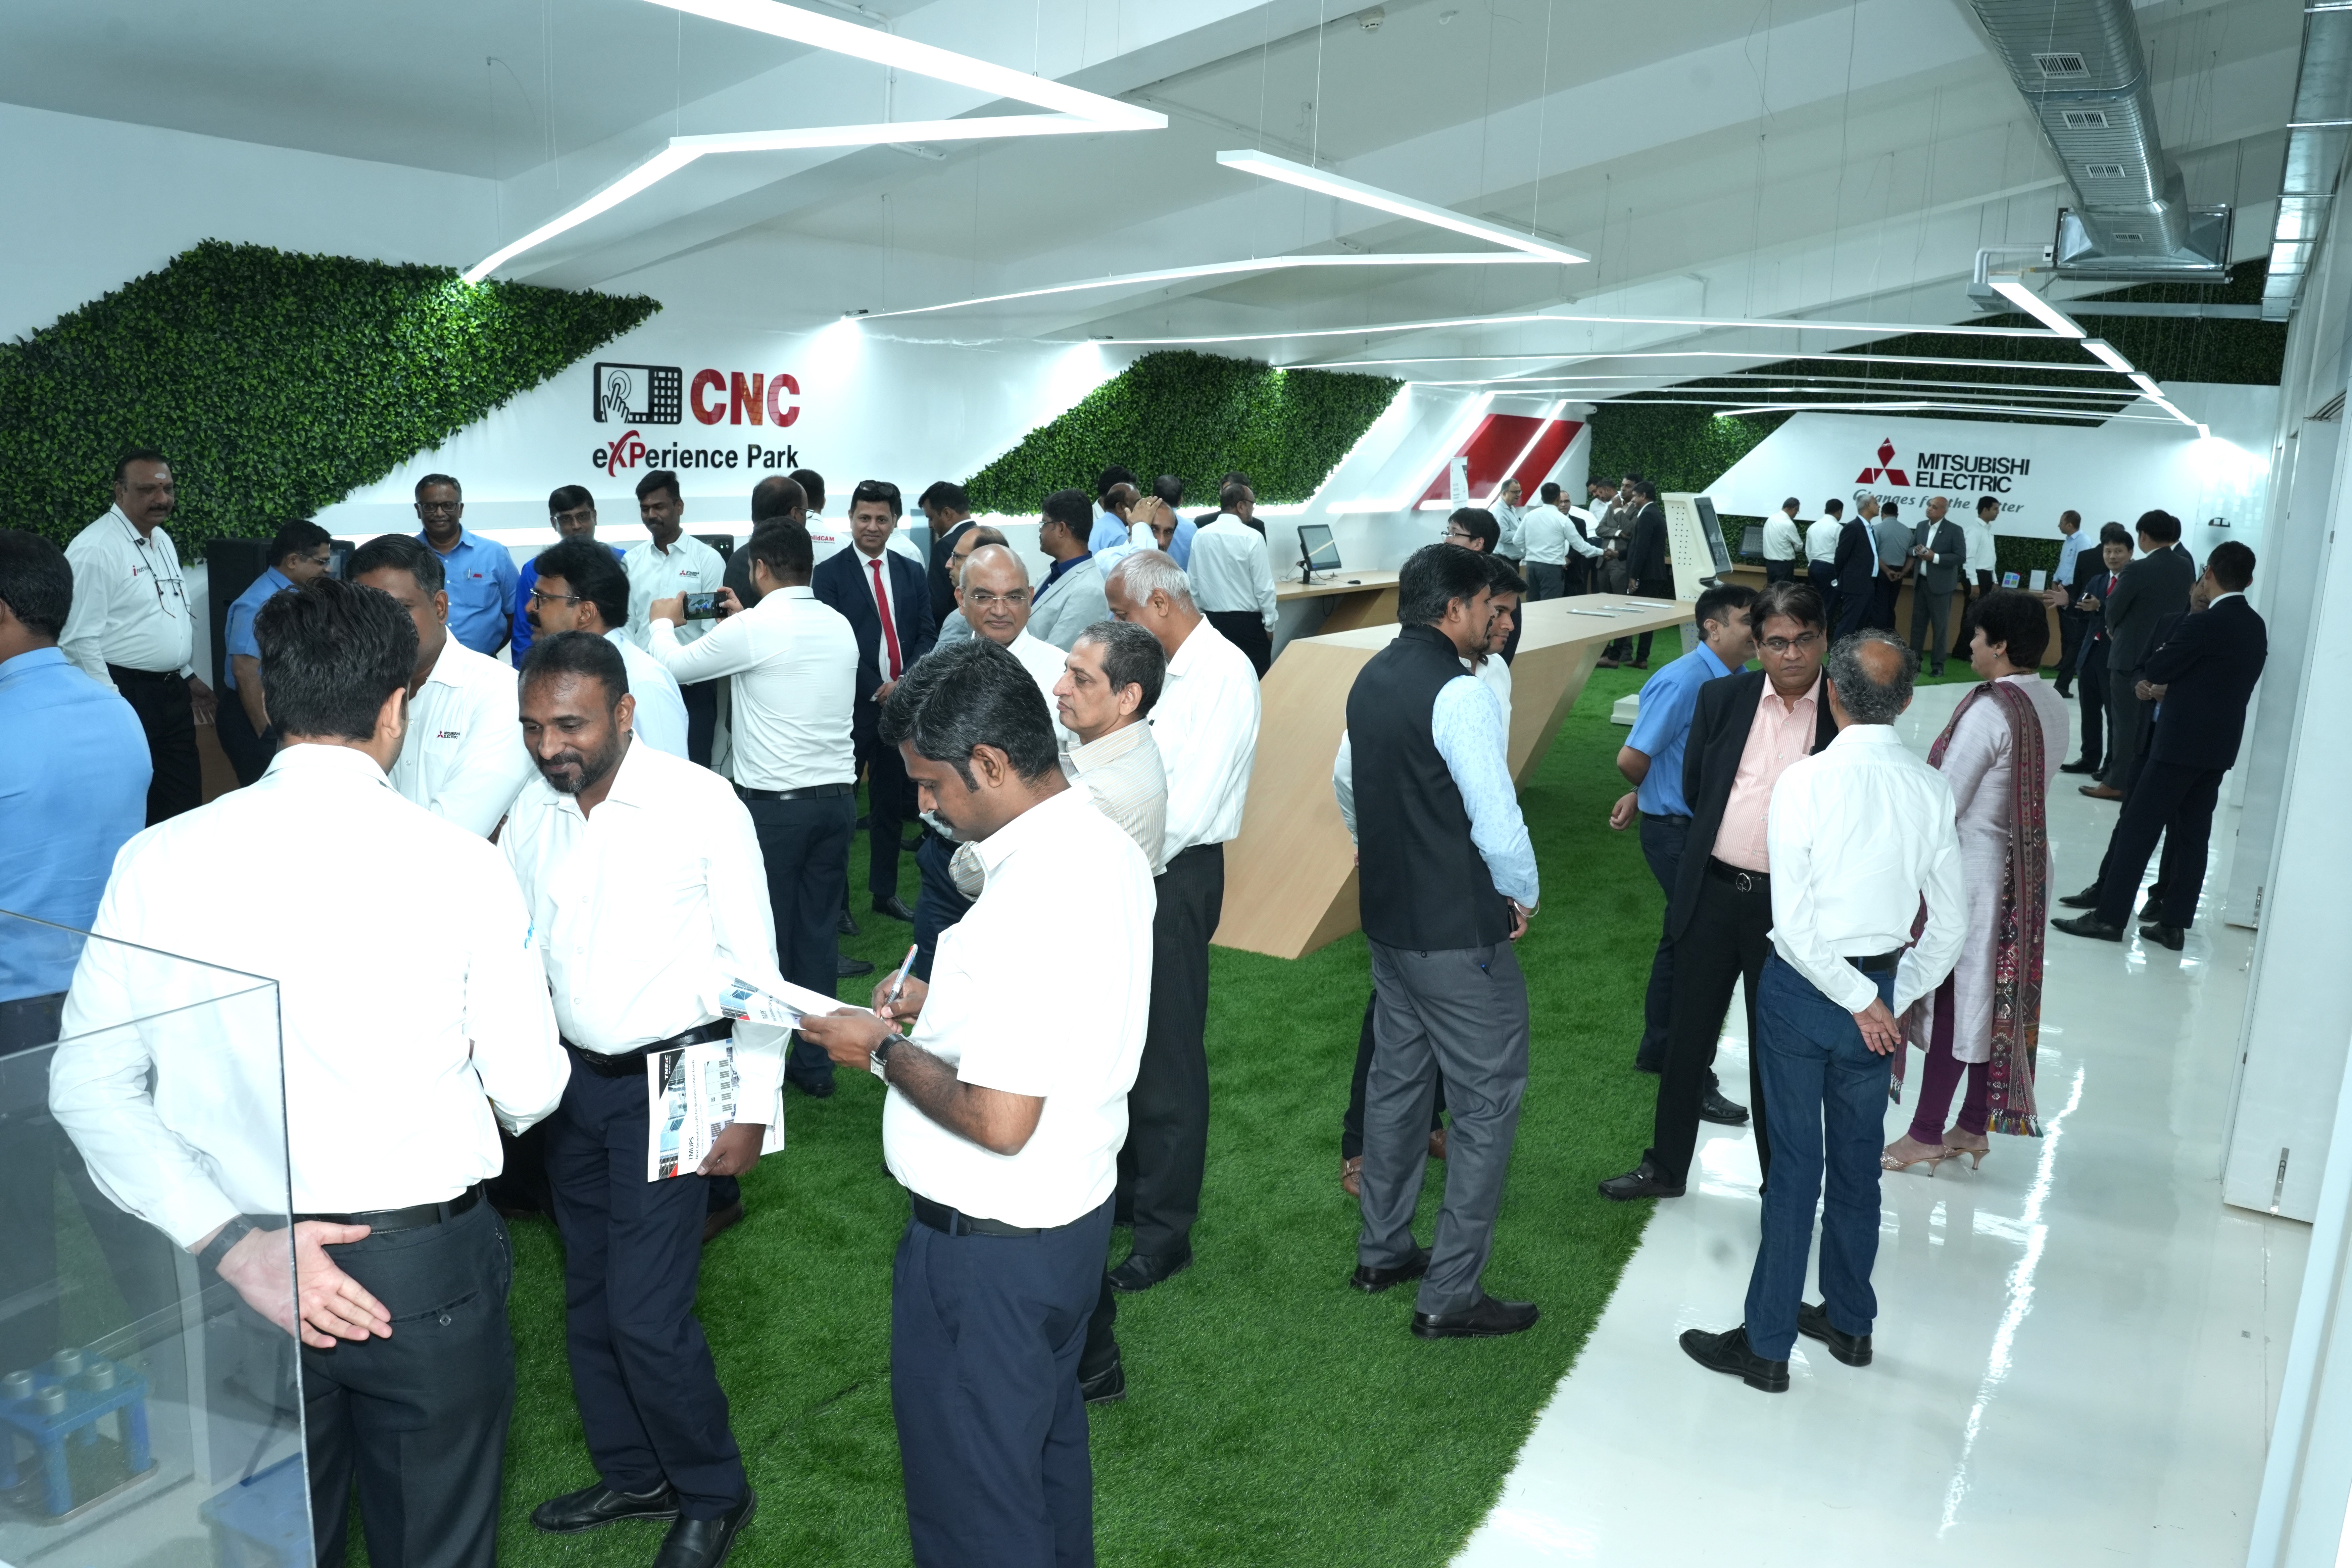 Open House for leading machine makers of the Machine Tool Industry